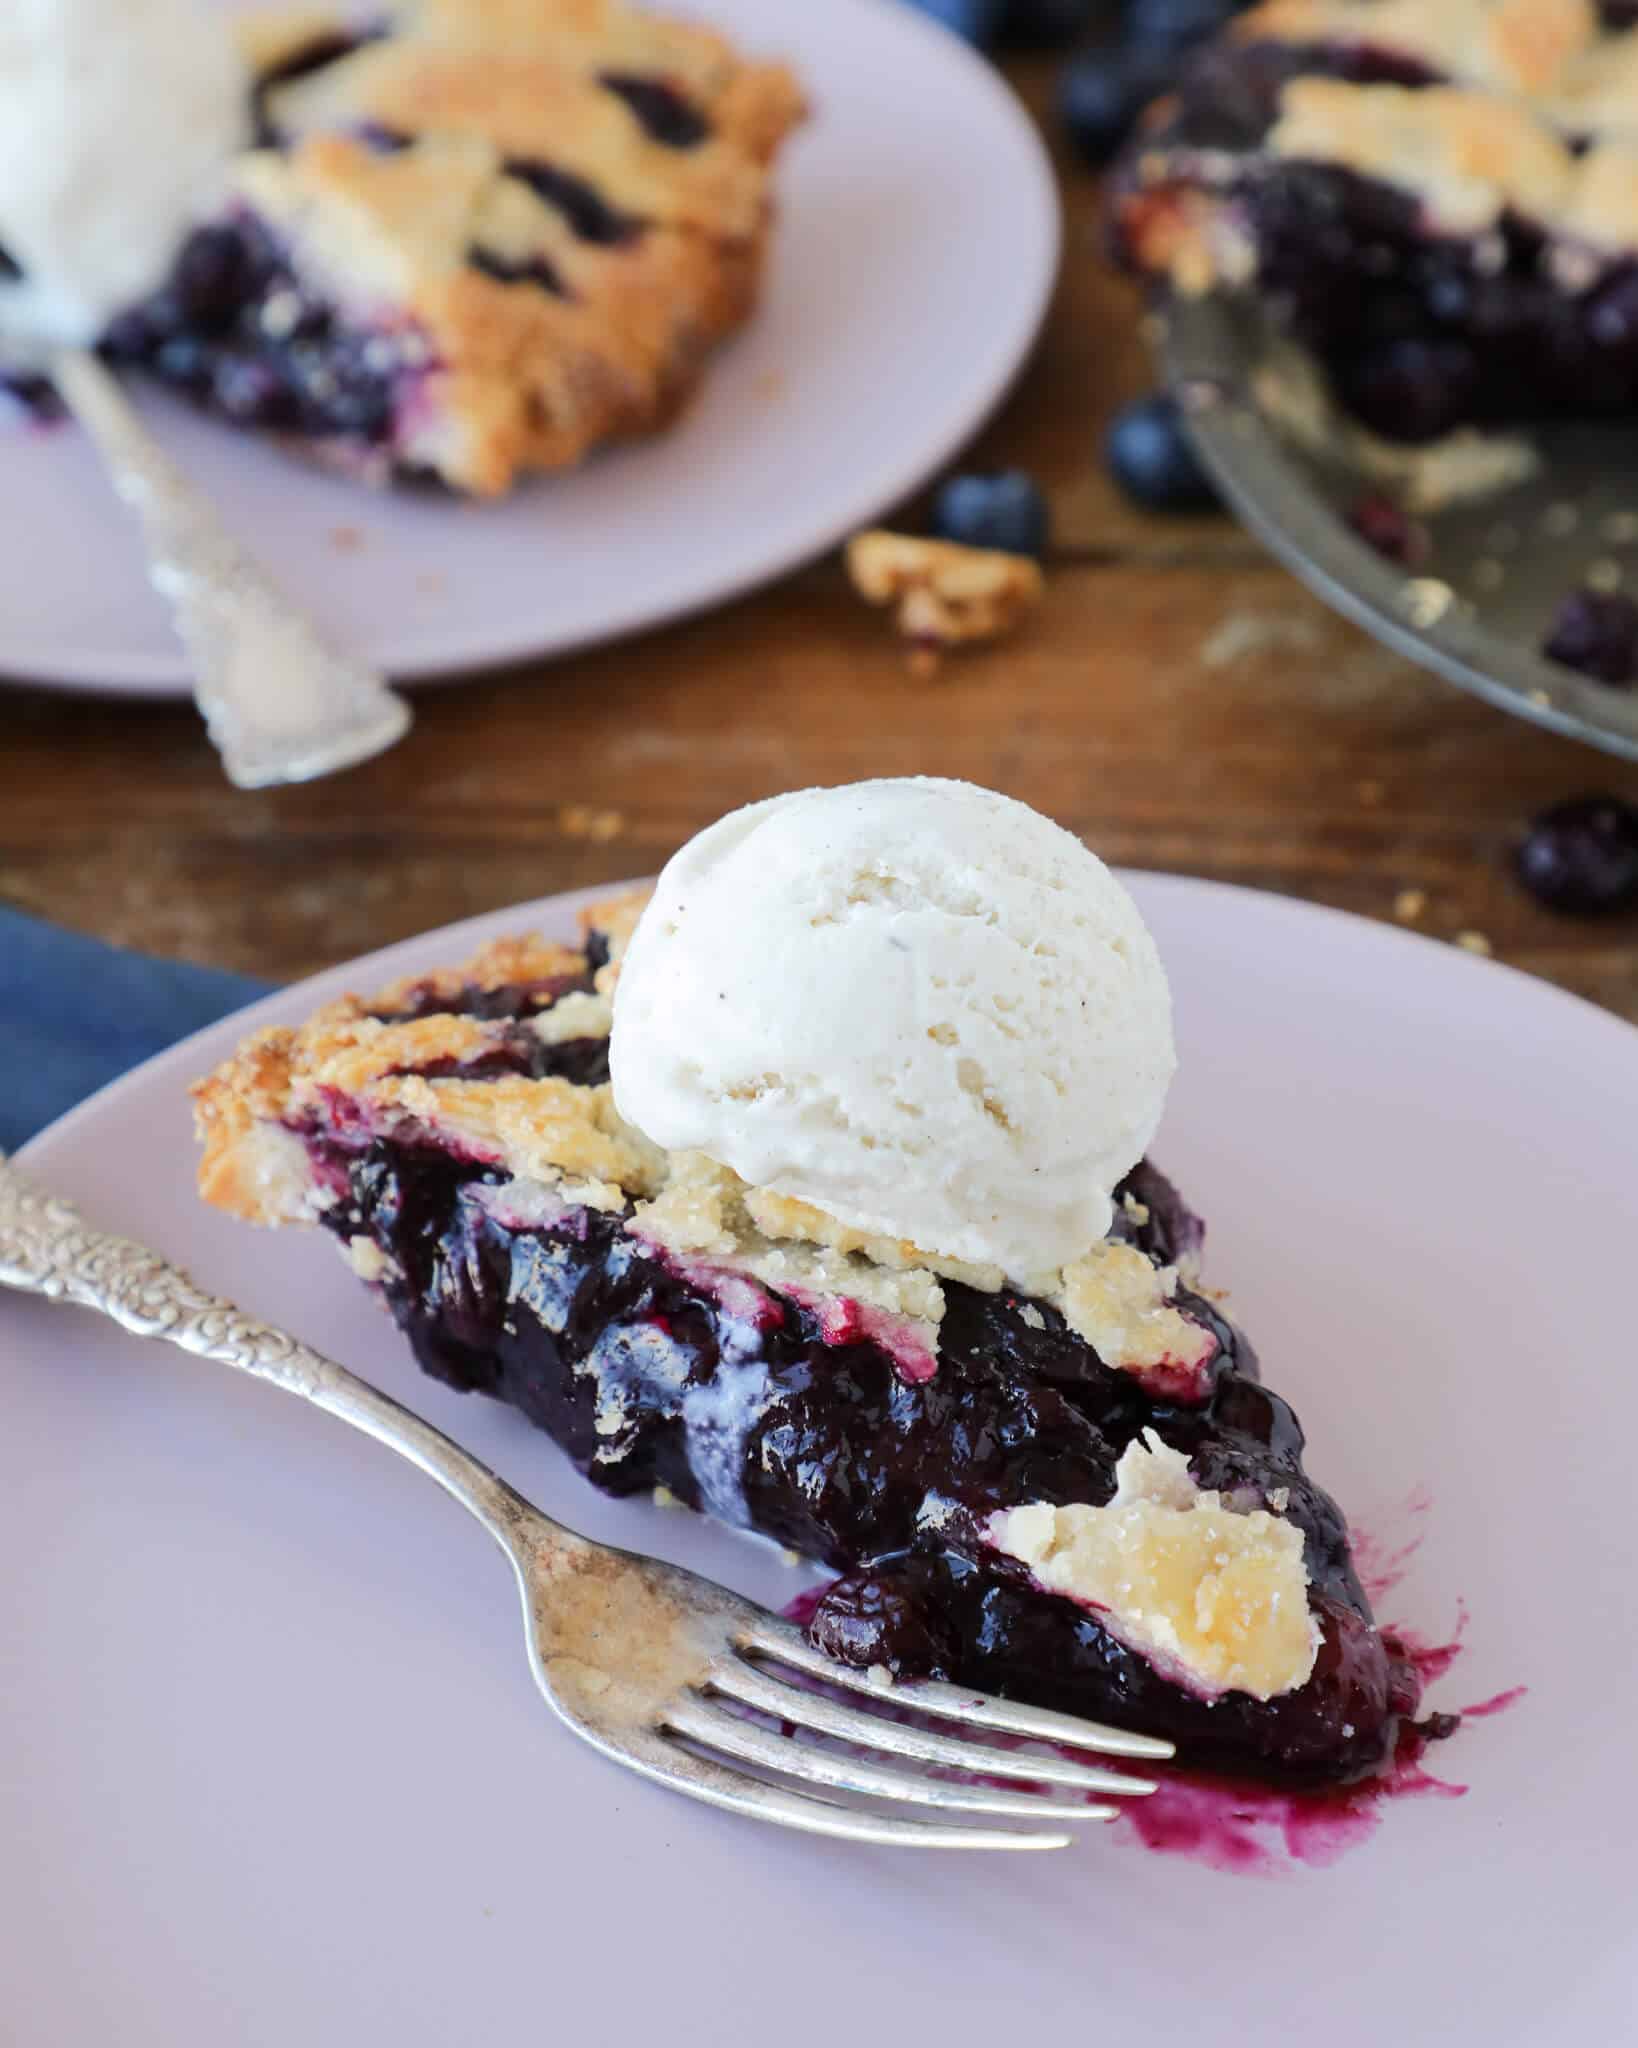 A slice of blueberry pie on a light lavender plate.